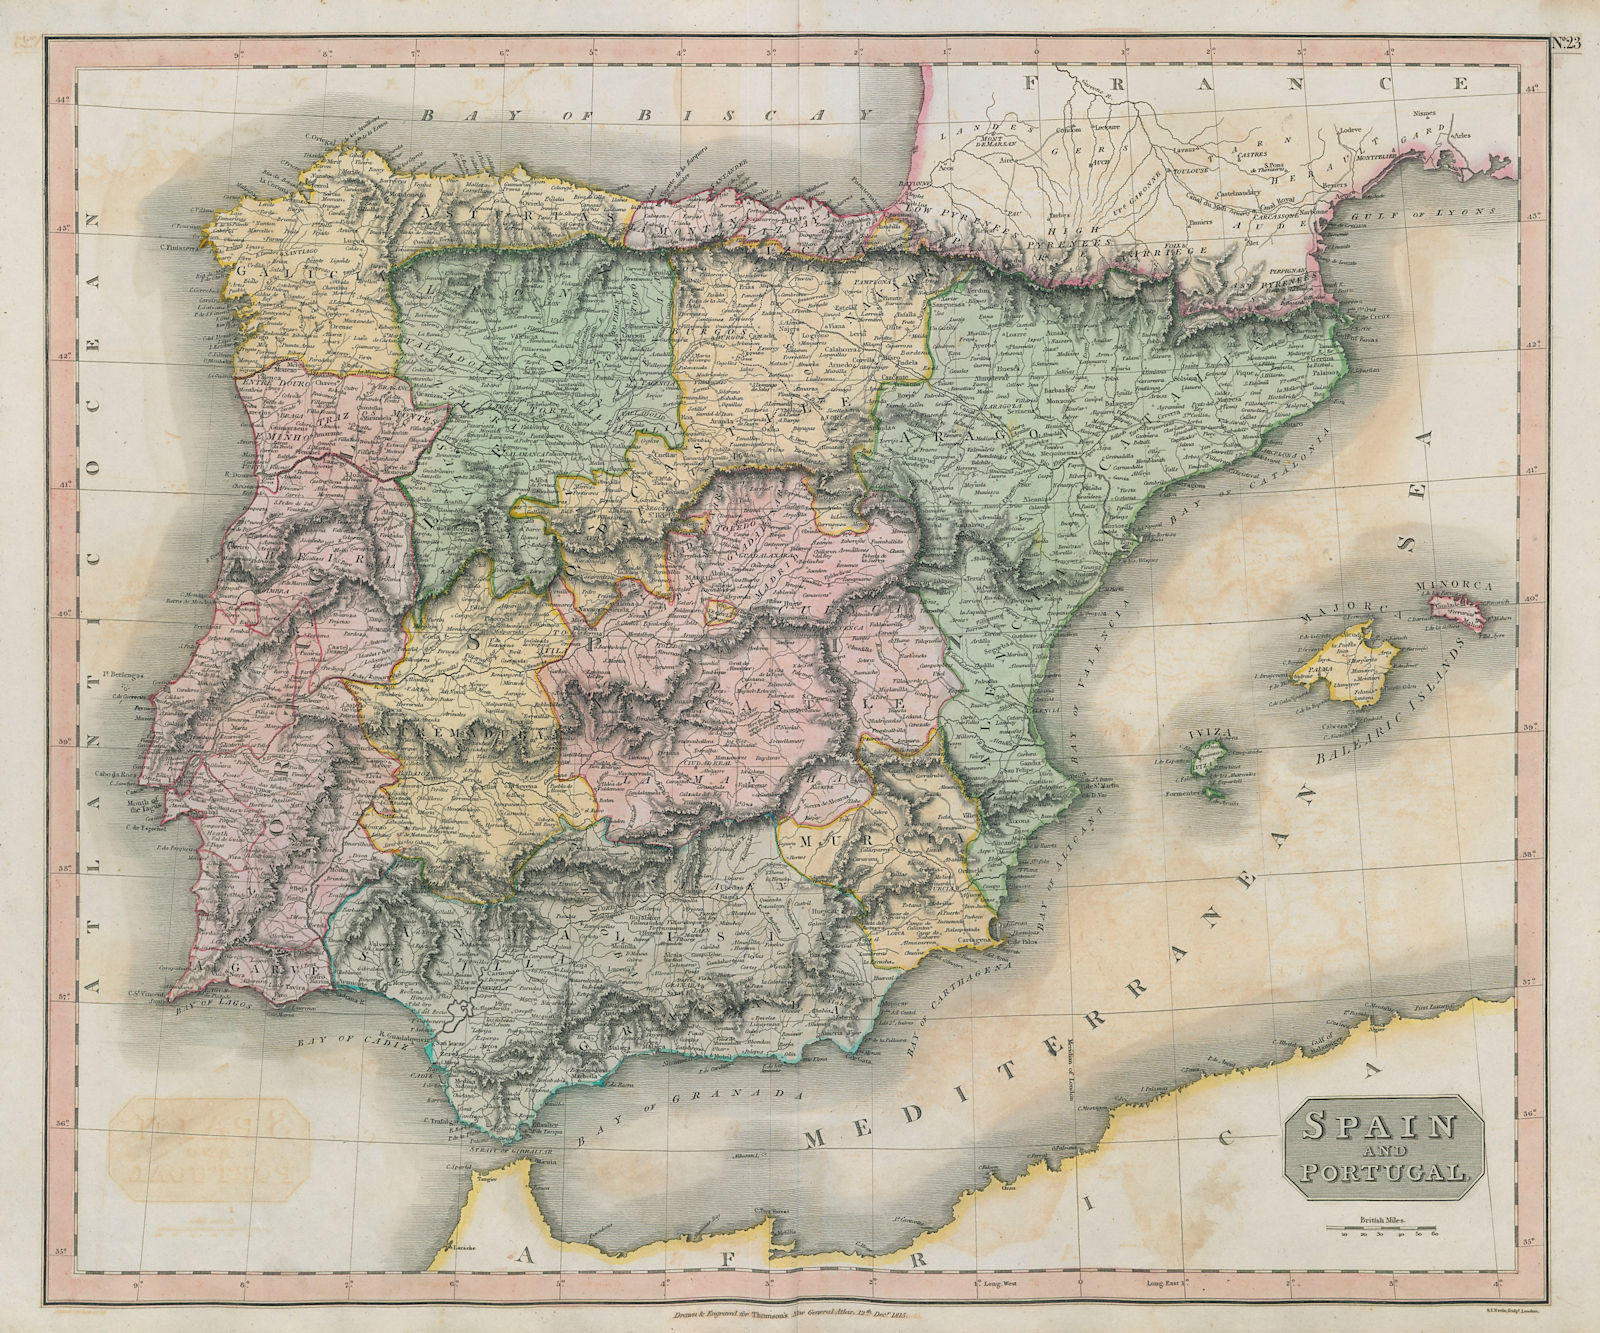 "Spain and Portugal" by John Thomson. Regions. Iberia 1817 old antique map